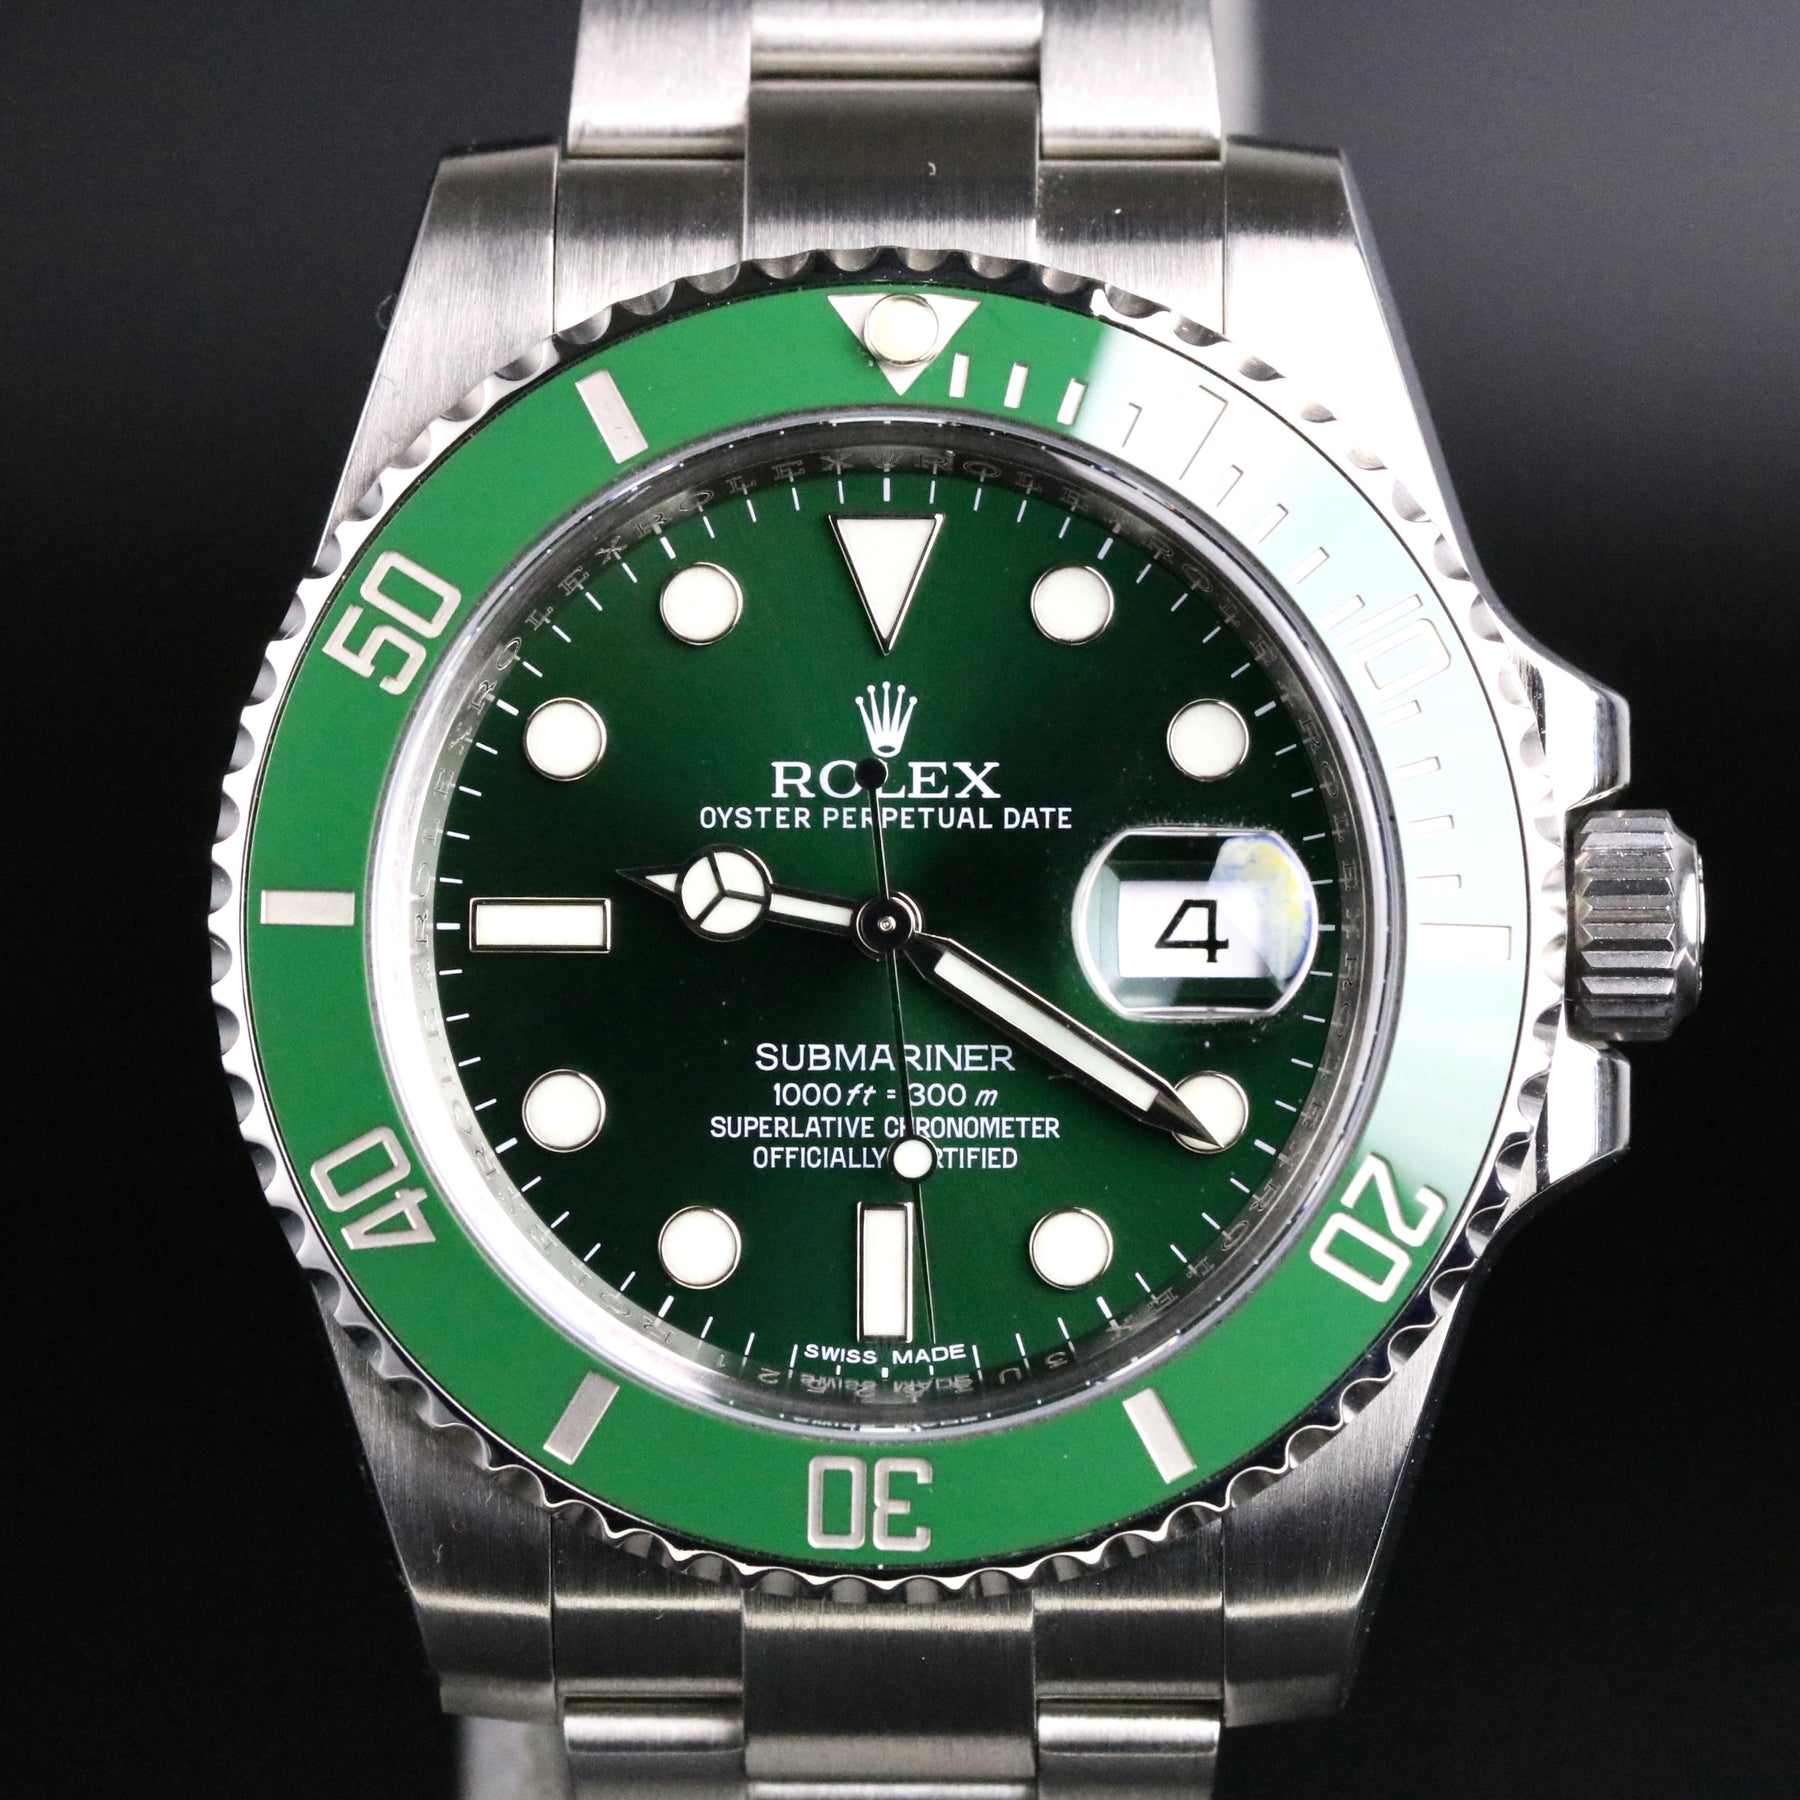 2014 Rolex 116610LV Submariner "Hulk" with Box & Papers